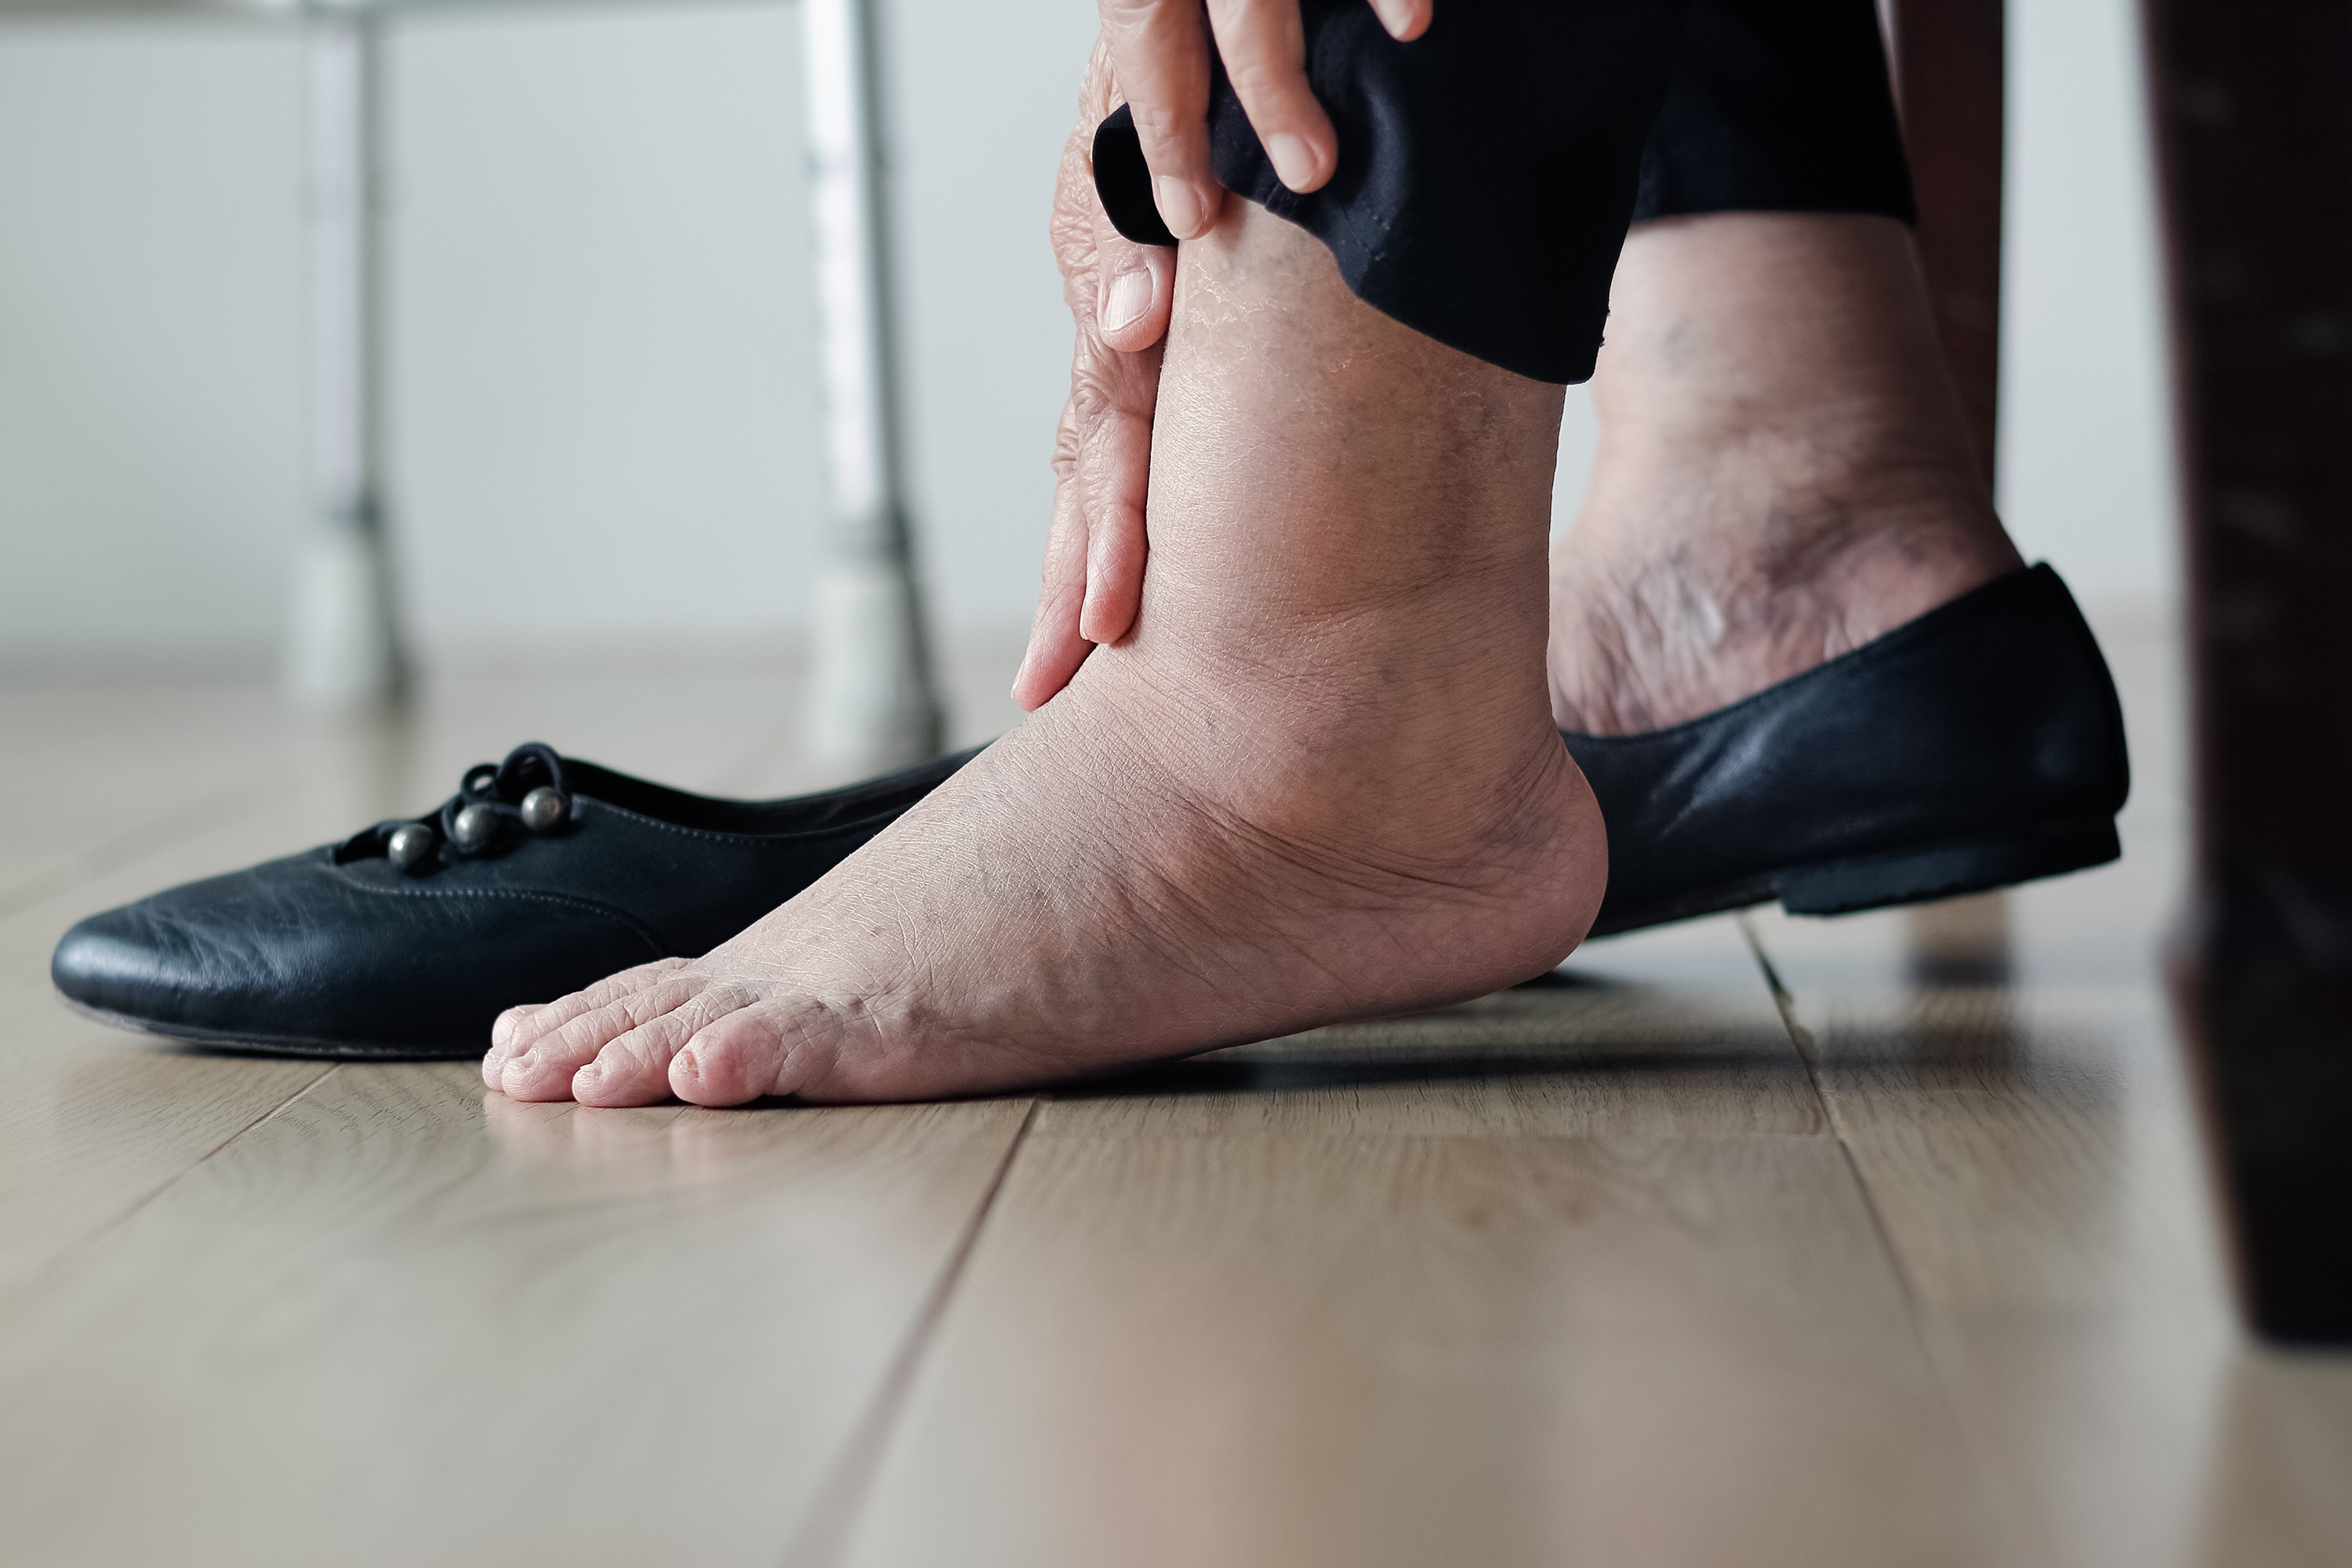 I Frequently Have Swollen Feet Causing Foot Pain: Should I Be Worried?